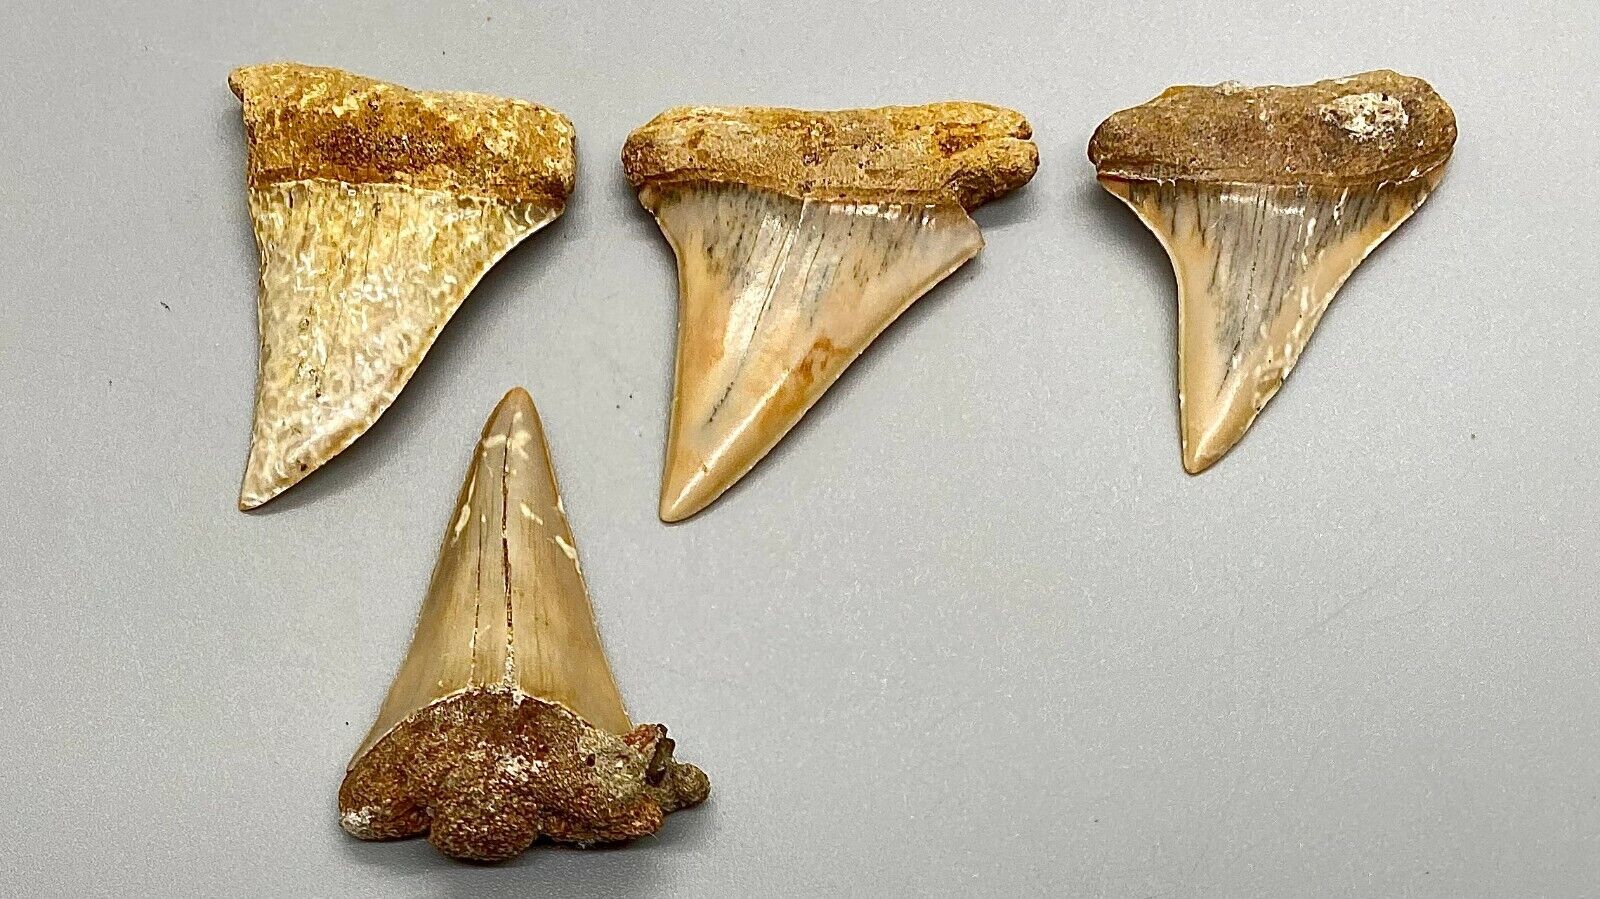 Group of 4 COLORFUL, beautiful teeth Fossil EXTINCT MAKO Shark Tooth - Chile